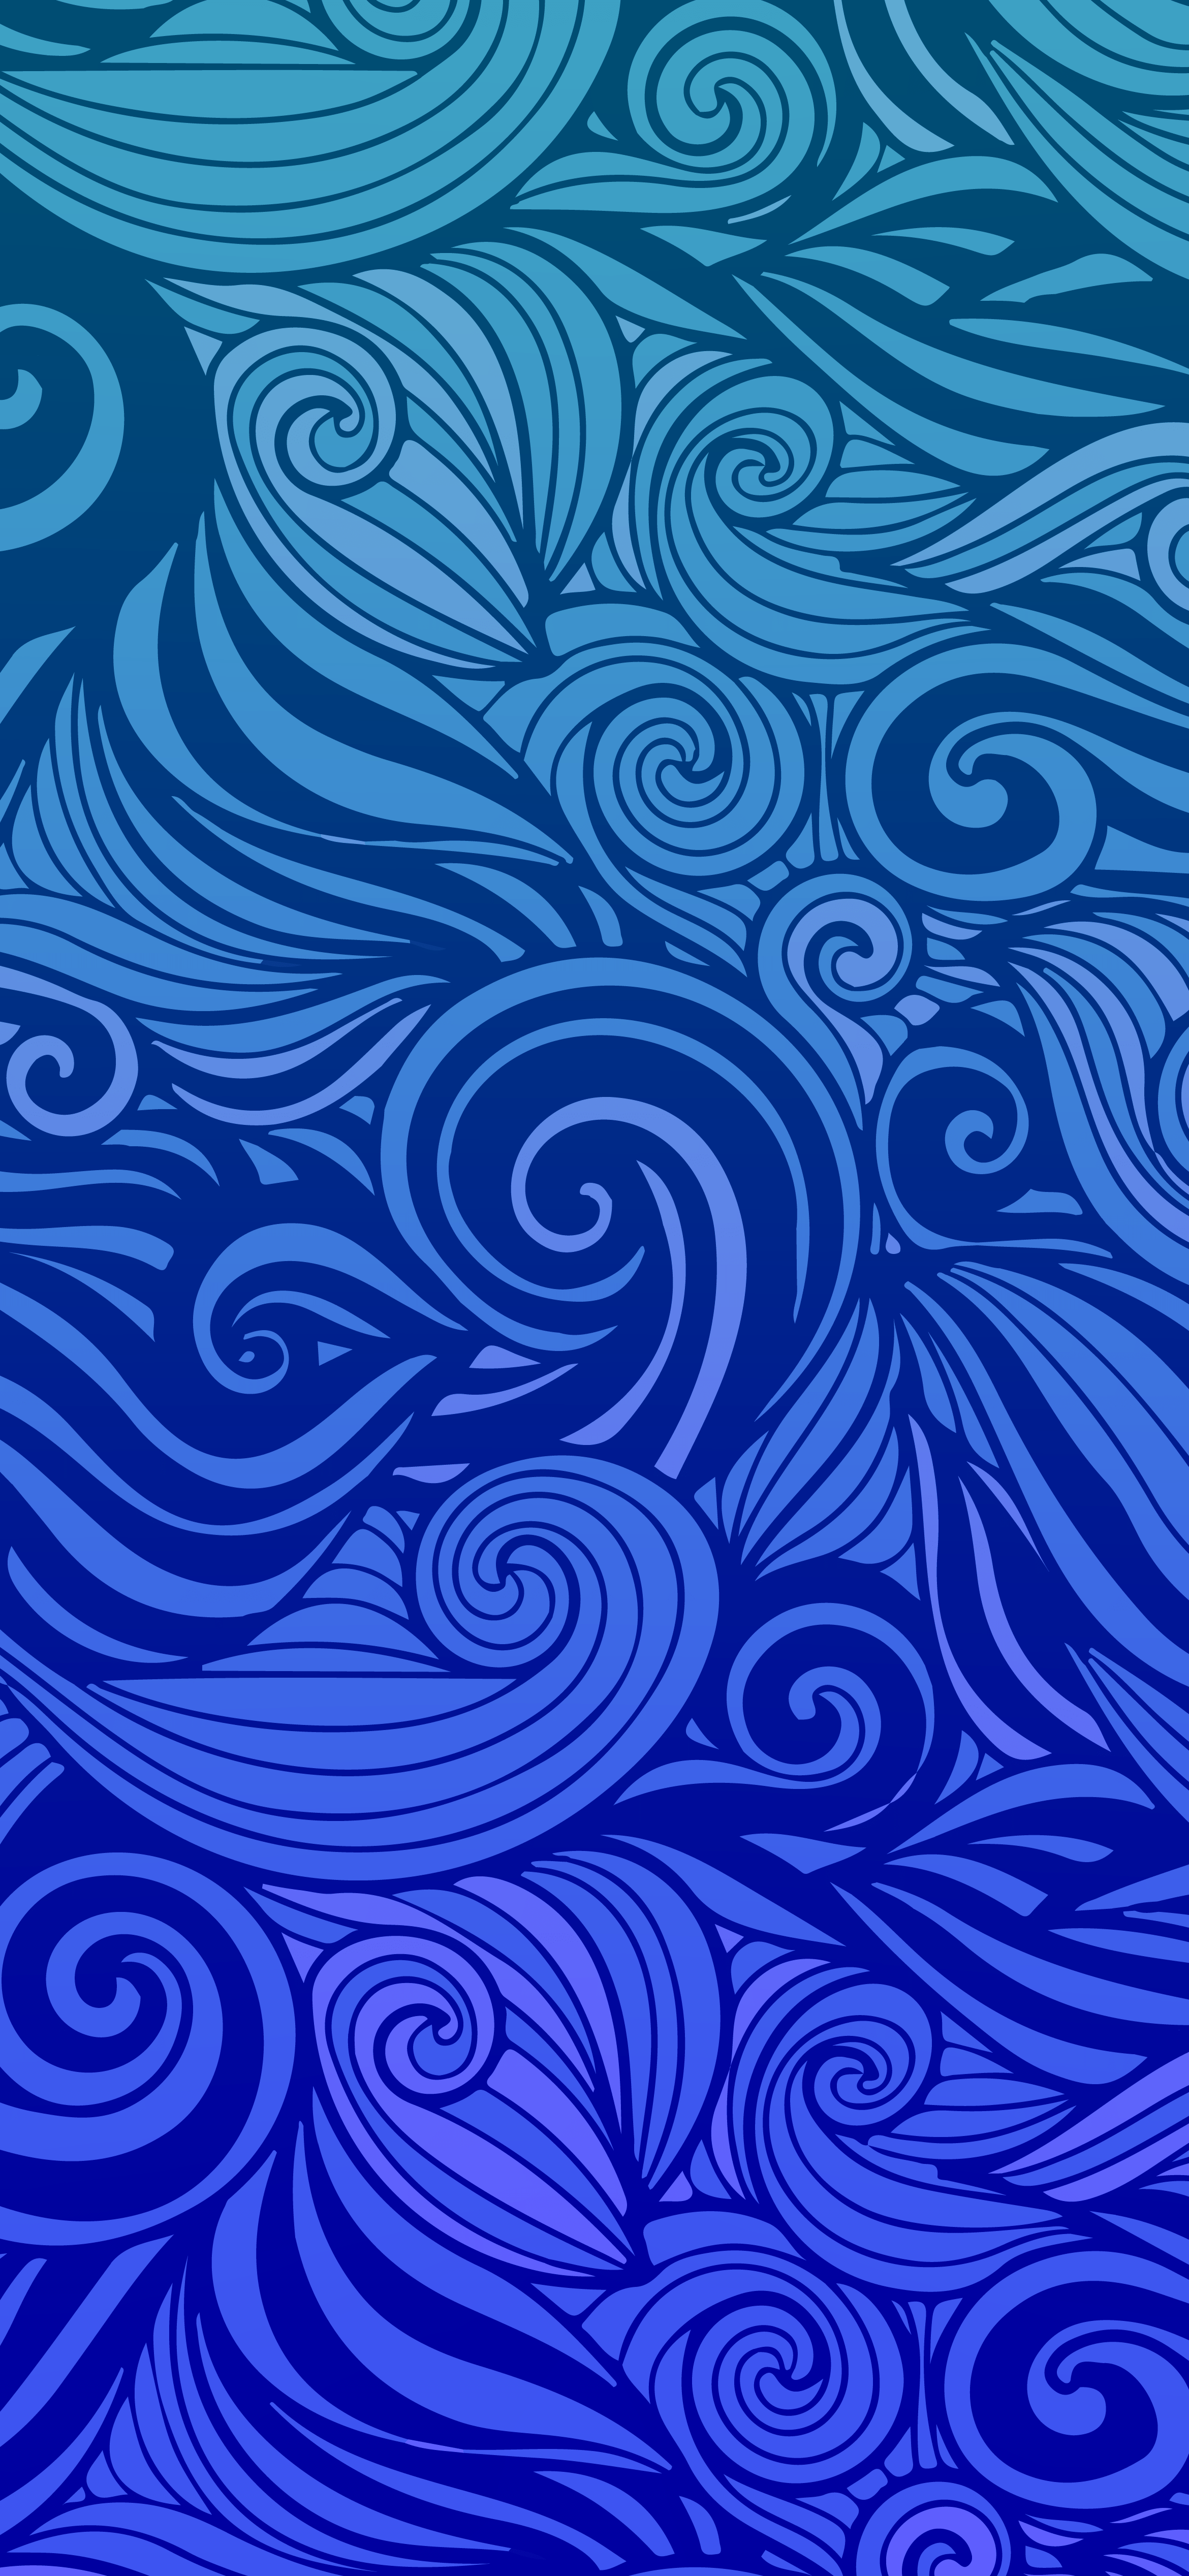 A blue and purple background with swirling waves - Pattern, blue